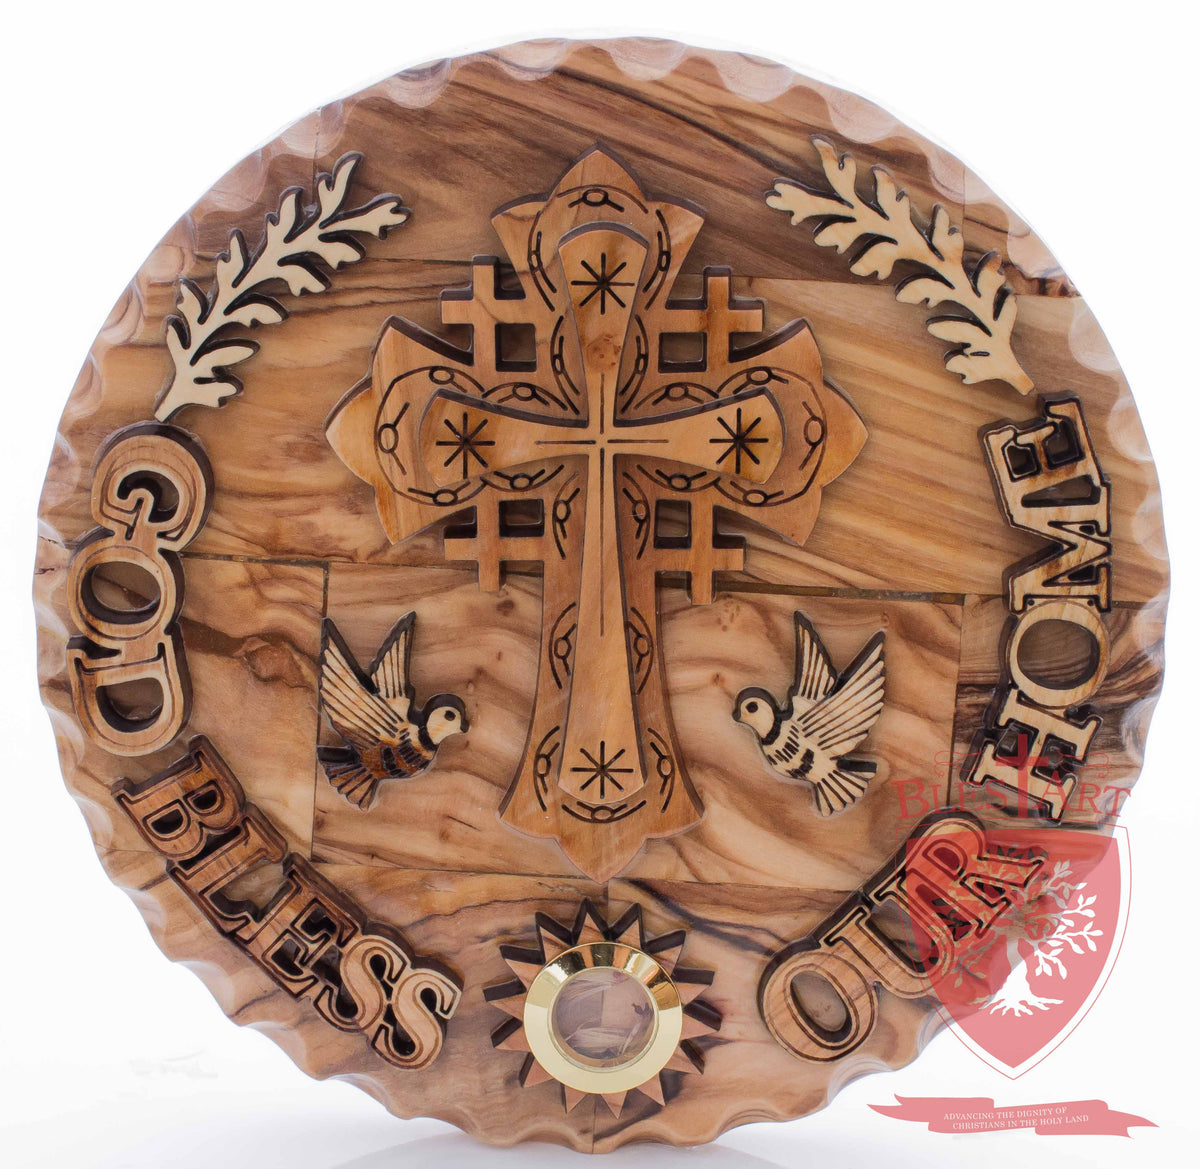 Plaque, "God Bless our home", Jerusalem Cross, Holy Item, Different sizes available.